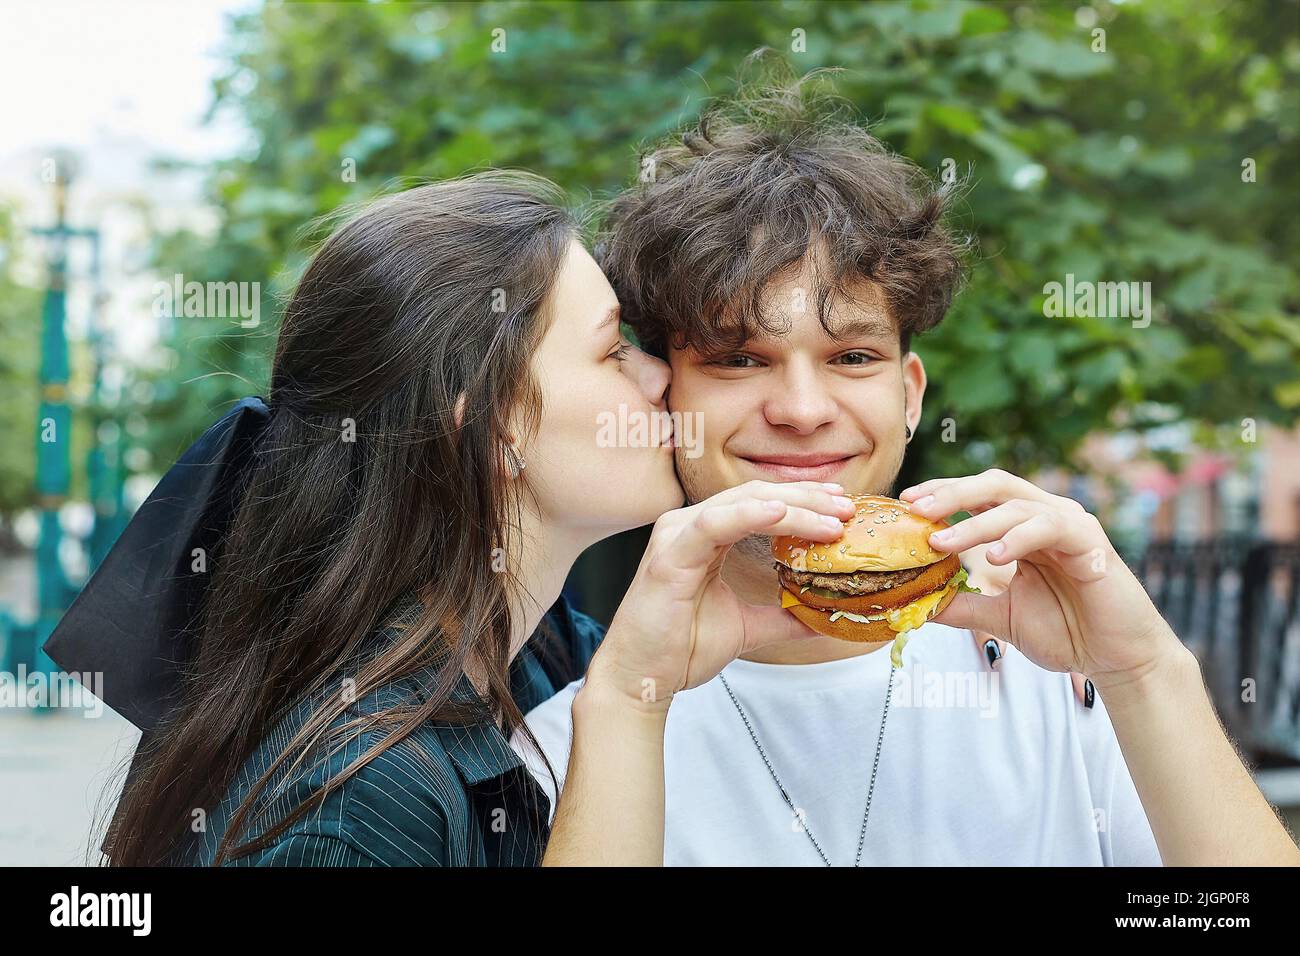 young girl kisses a guy who is holding a burger in his hands. Stock Photo